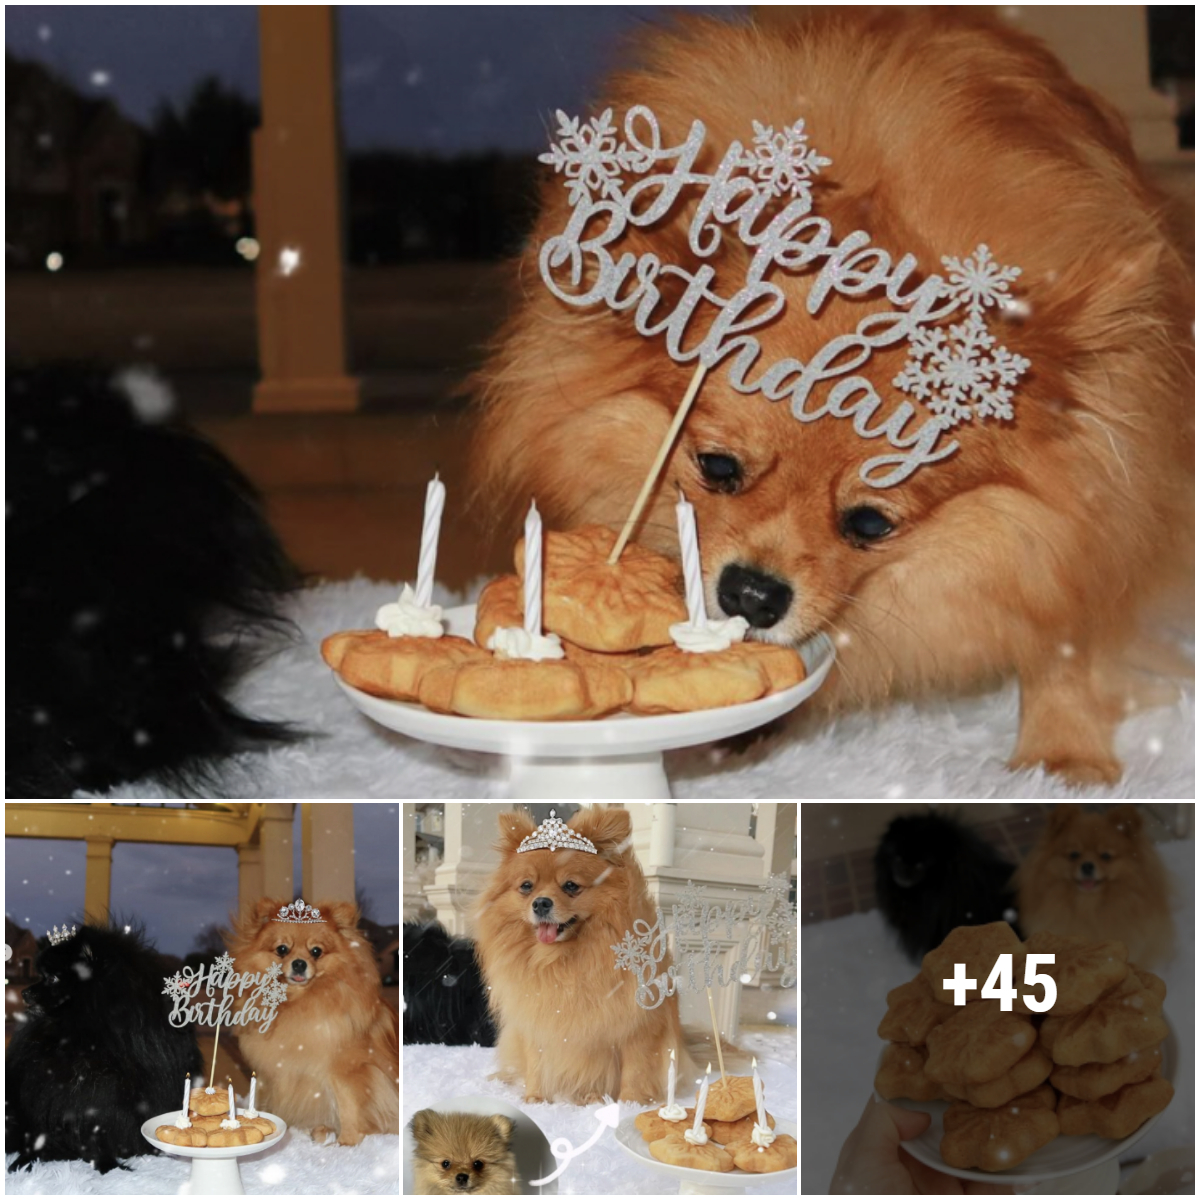 Formal Birthday: A sad celebration of our sad dog, send your birthday wishes to this beautiful dog